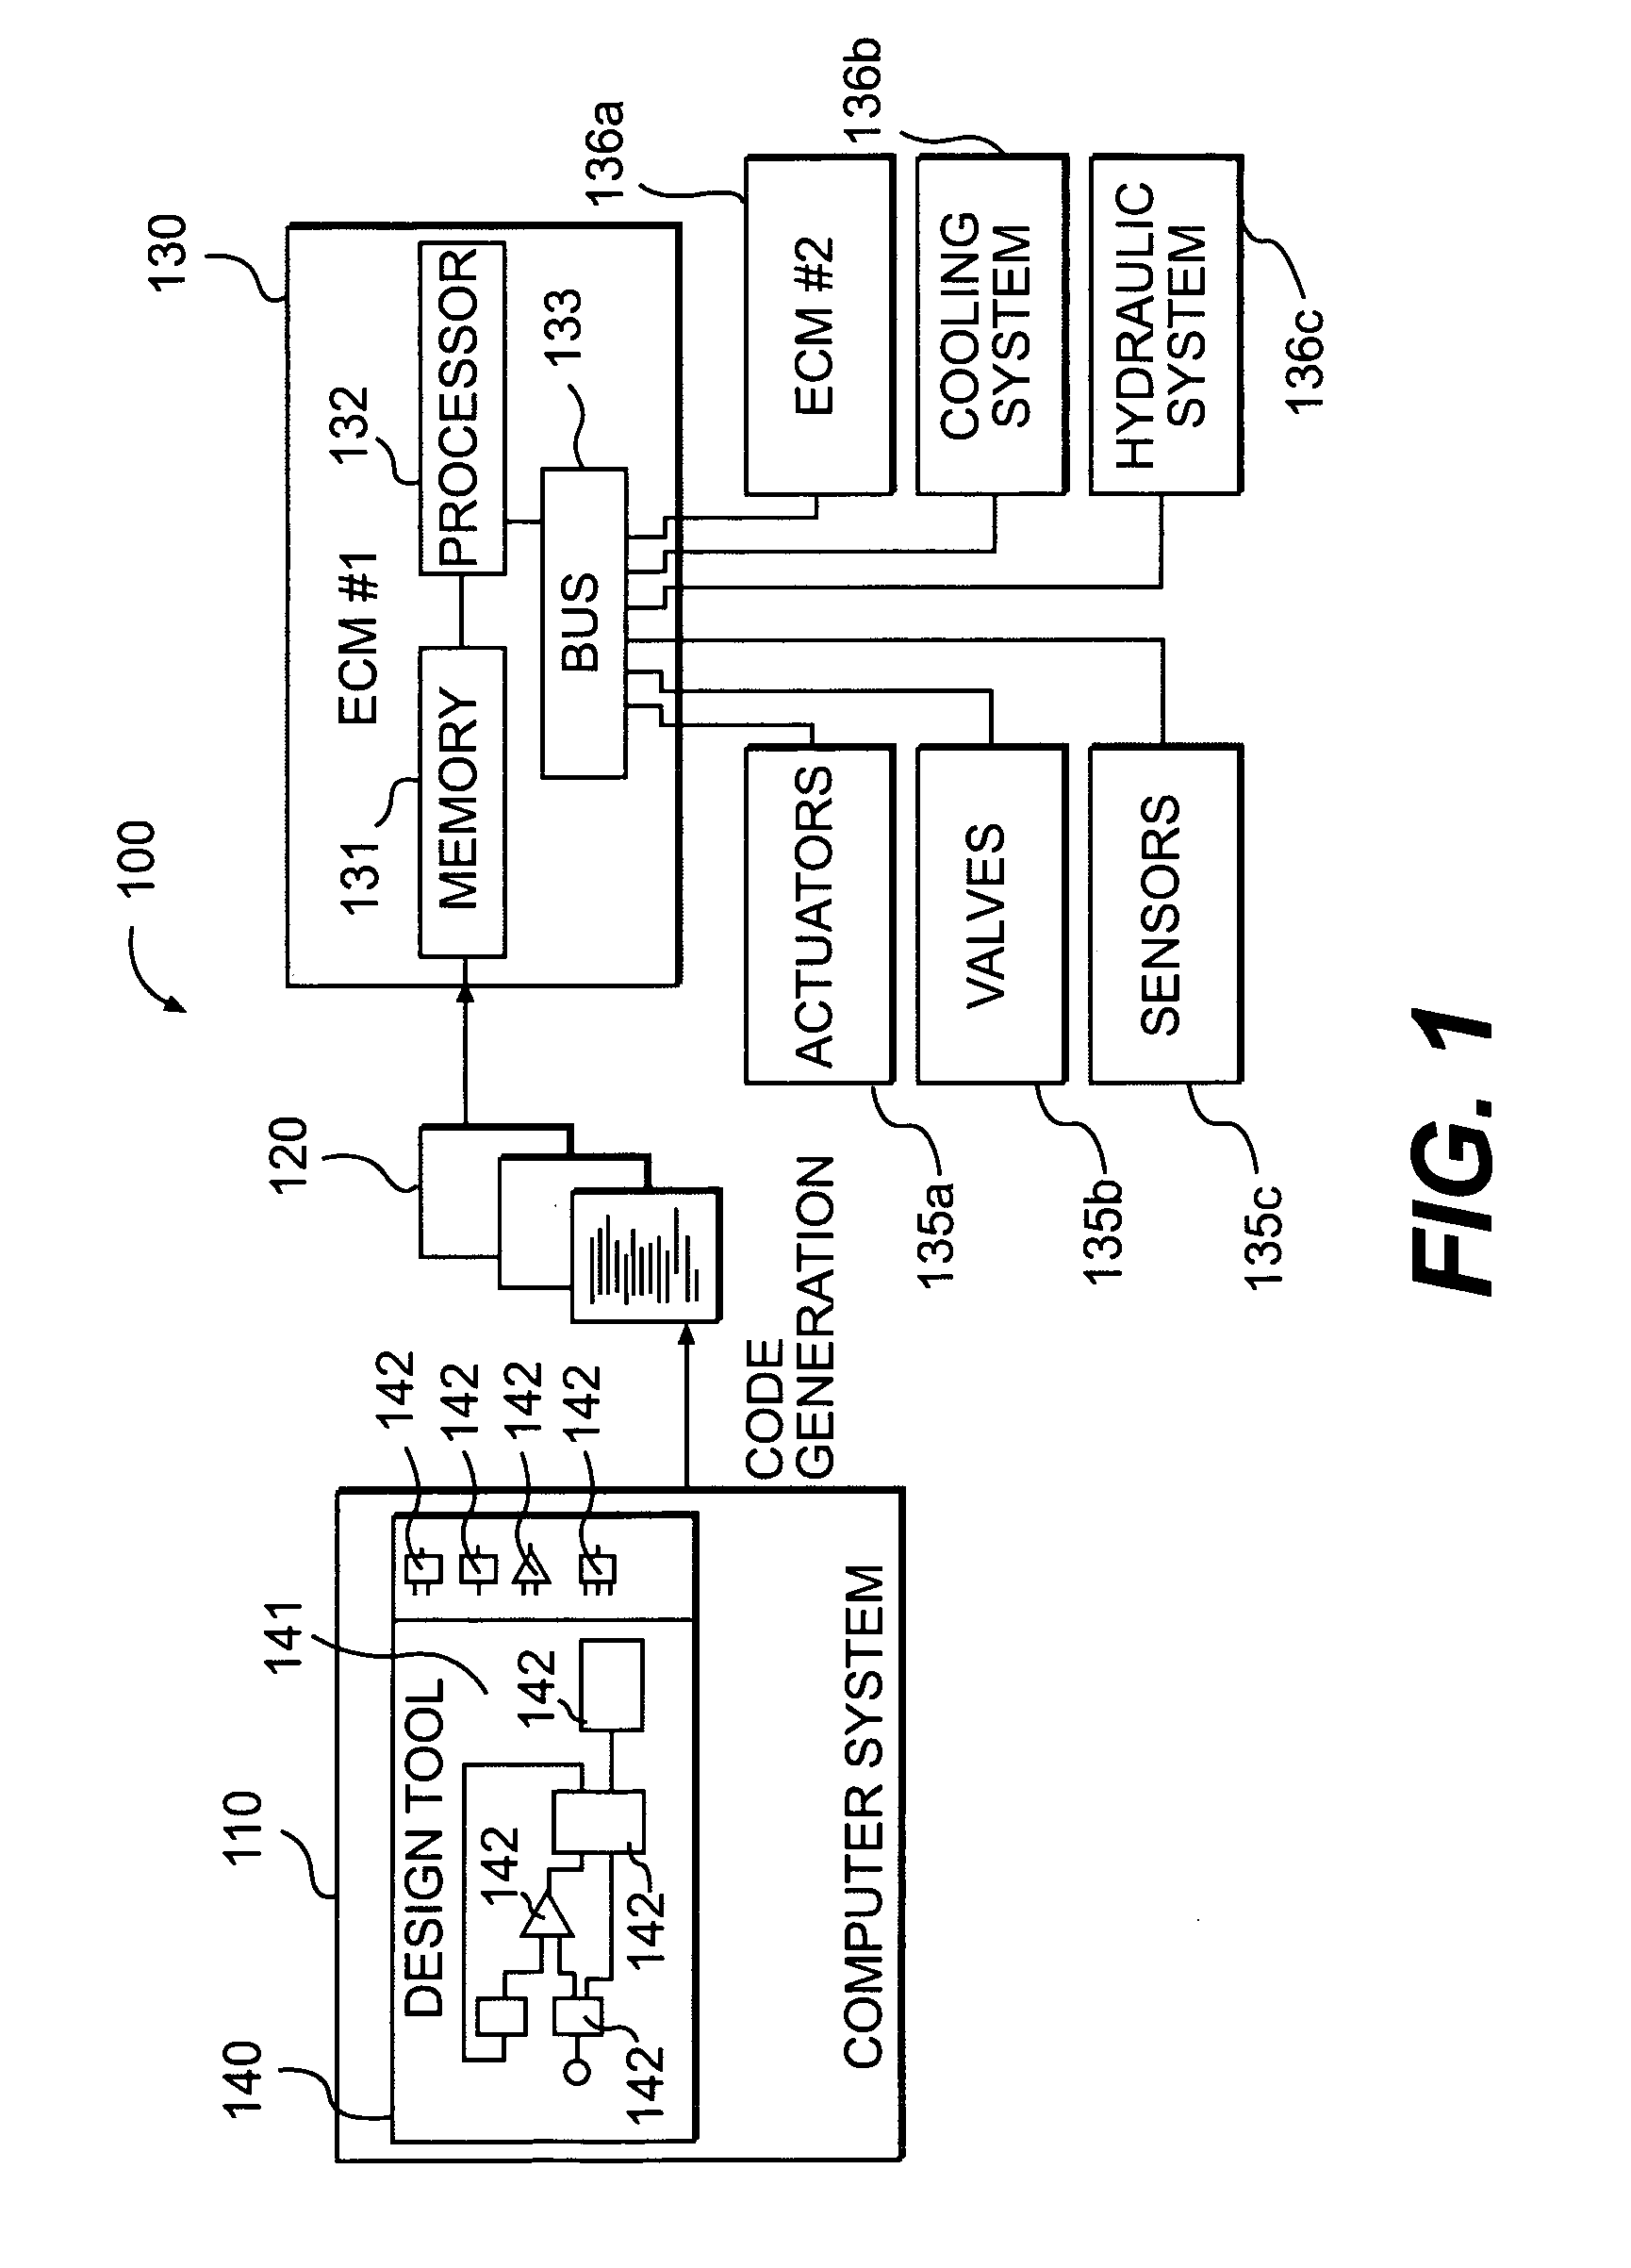 Data elements with selectable signal/parameter behavior control